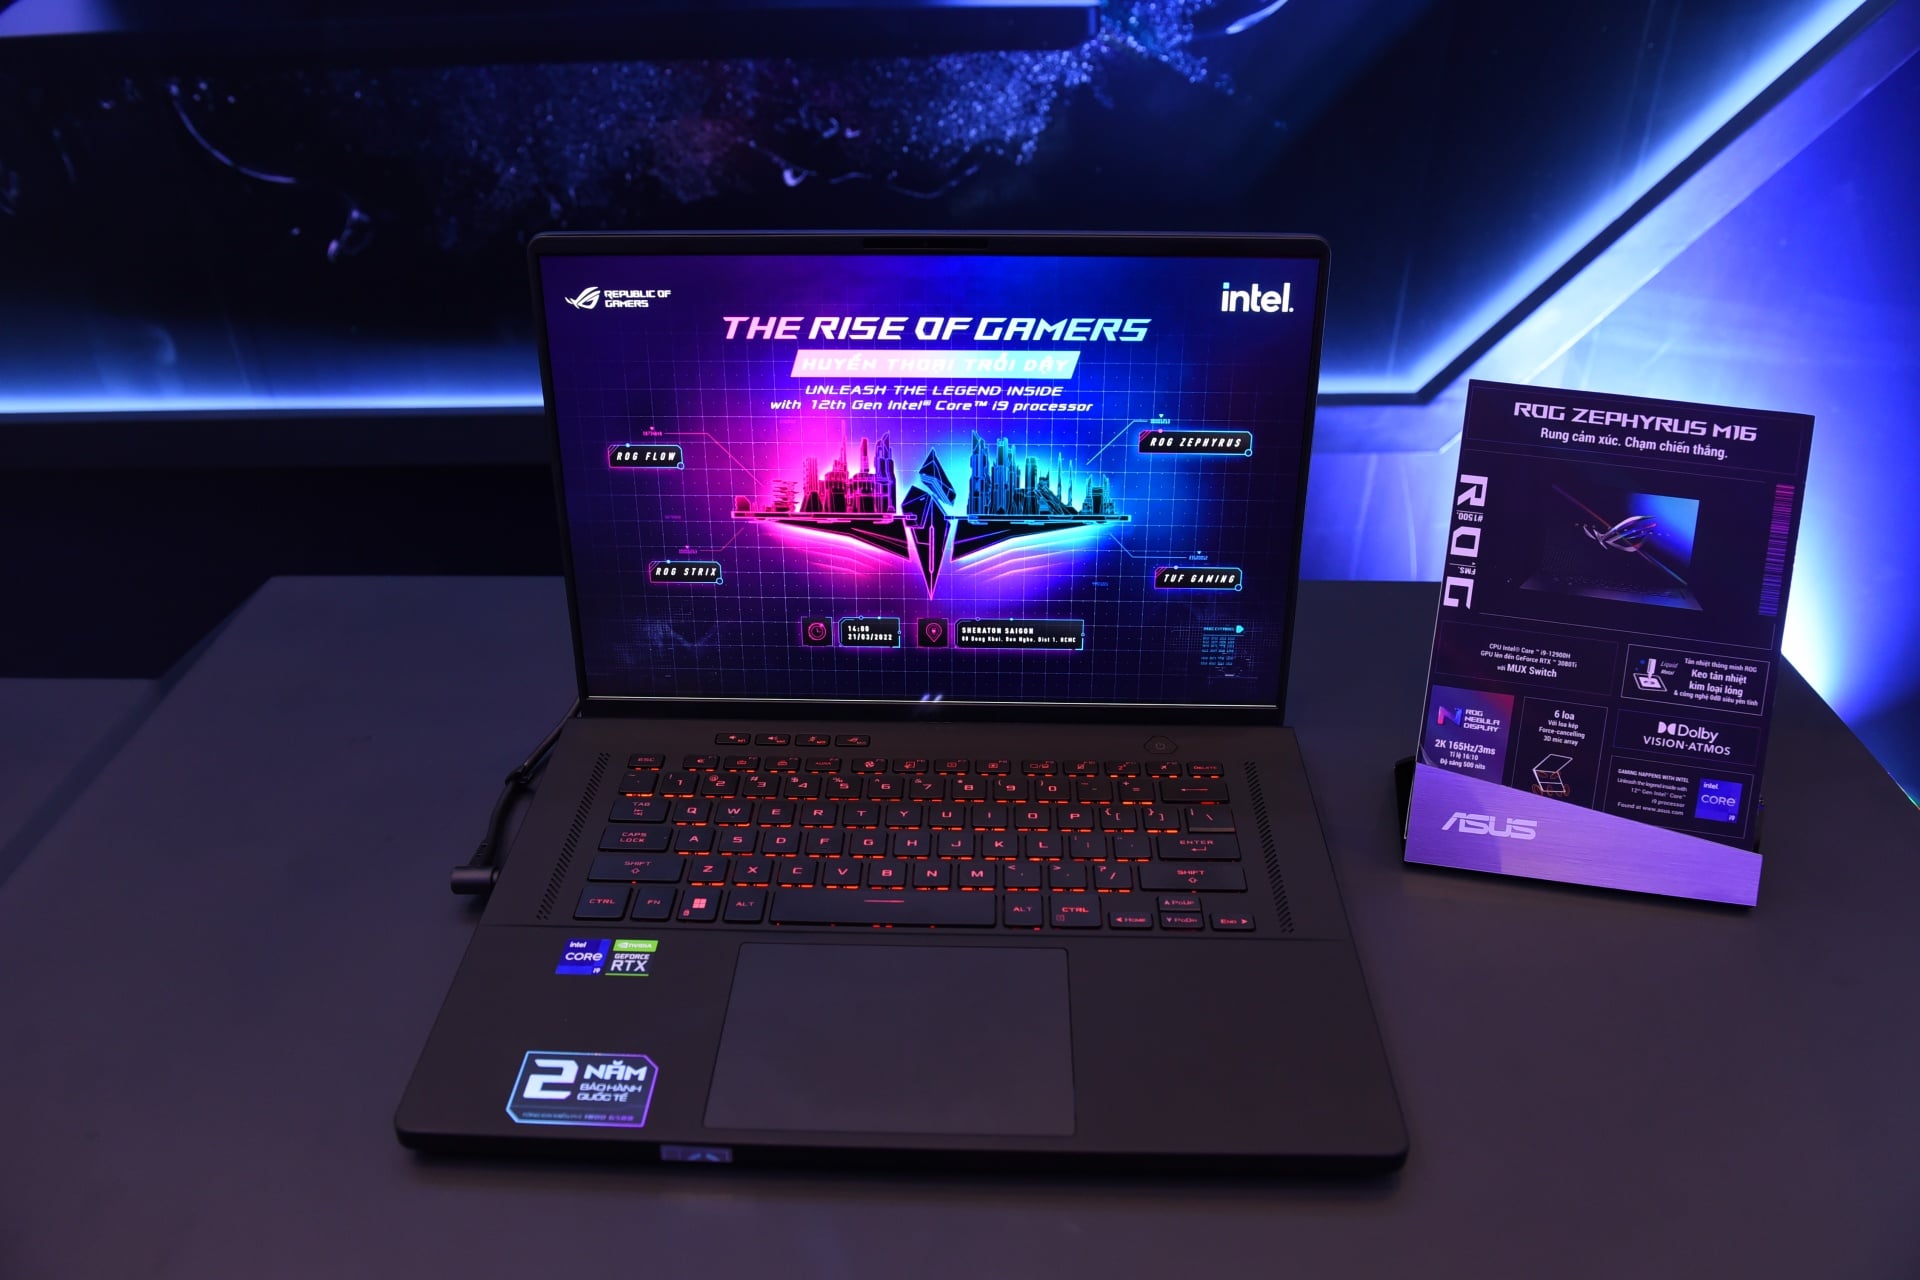 TCBC ASUS ROG khuay dao thi truong voi loat Laptop Gaming dinh dam su dung Intel the he 12 14 MMOSITE - Thông tin công nghệ, review, thủ thuật PC, gaming